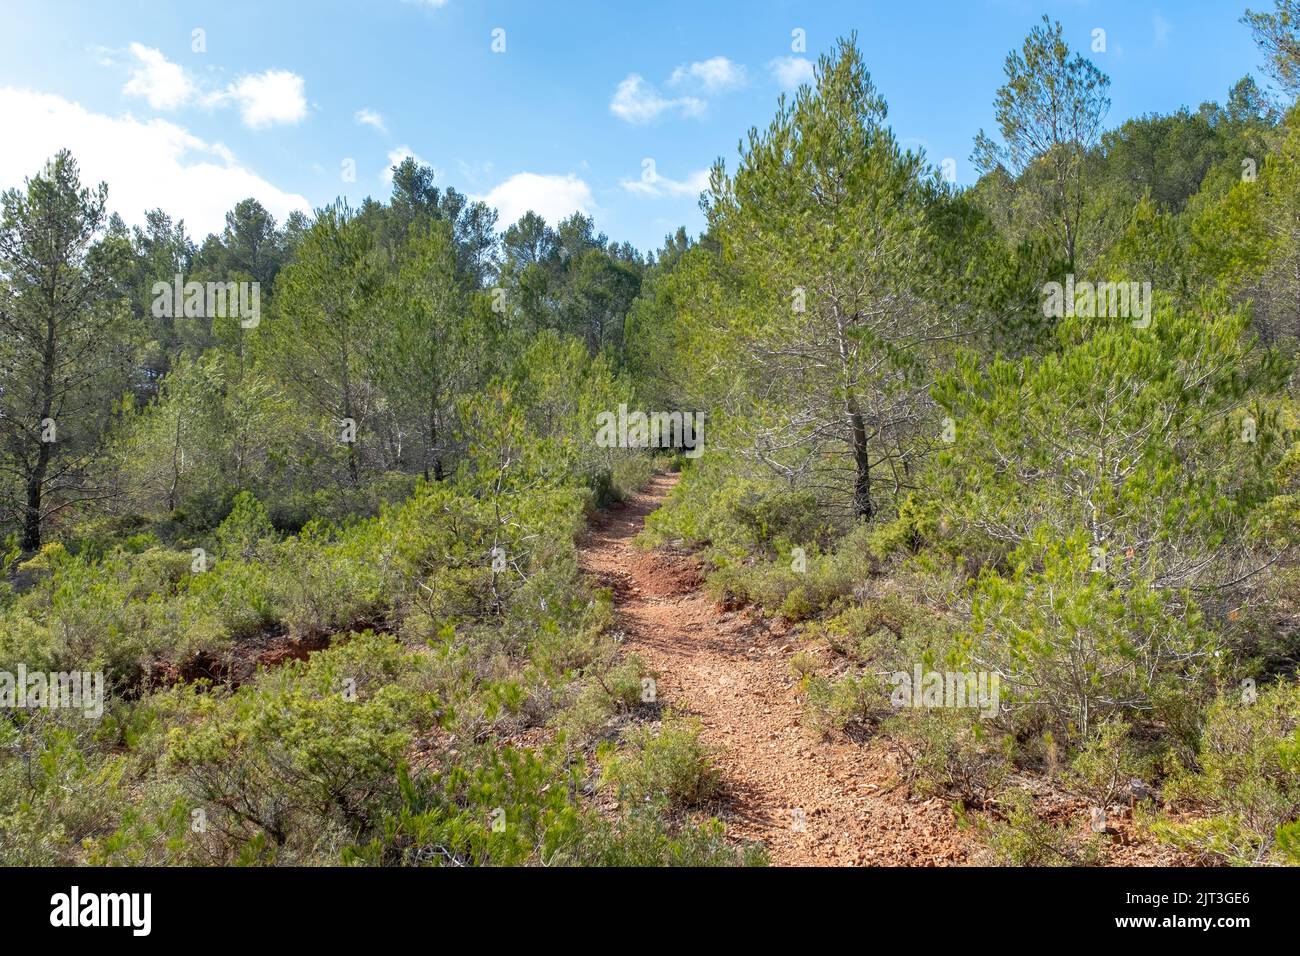 A hiking trail in southern France scrubland with no people, taken on a sunny early spring day Stock Photo